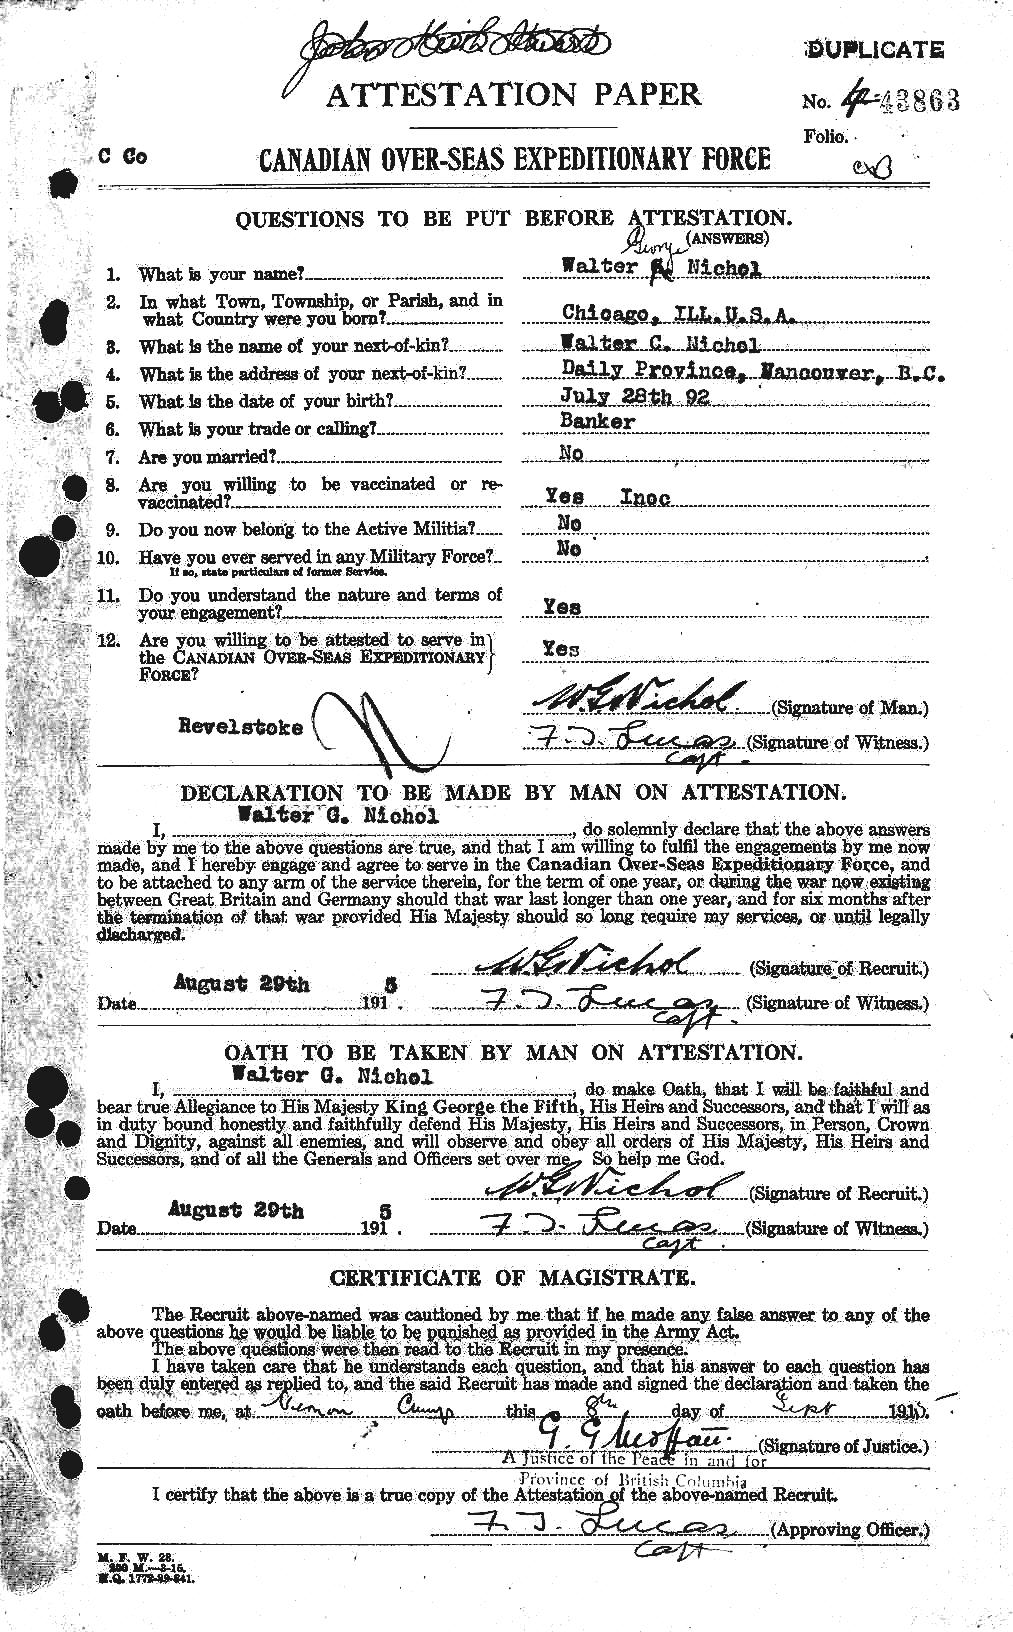 Personnel Records of the First World War - CEF 556196a